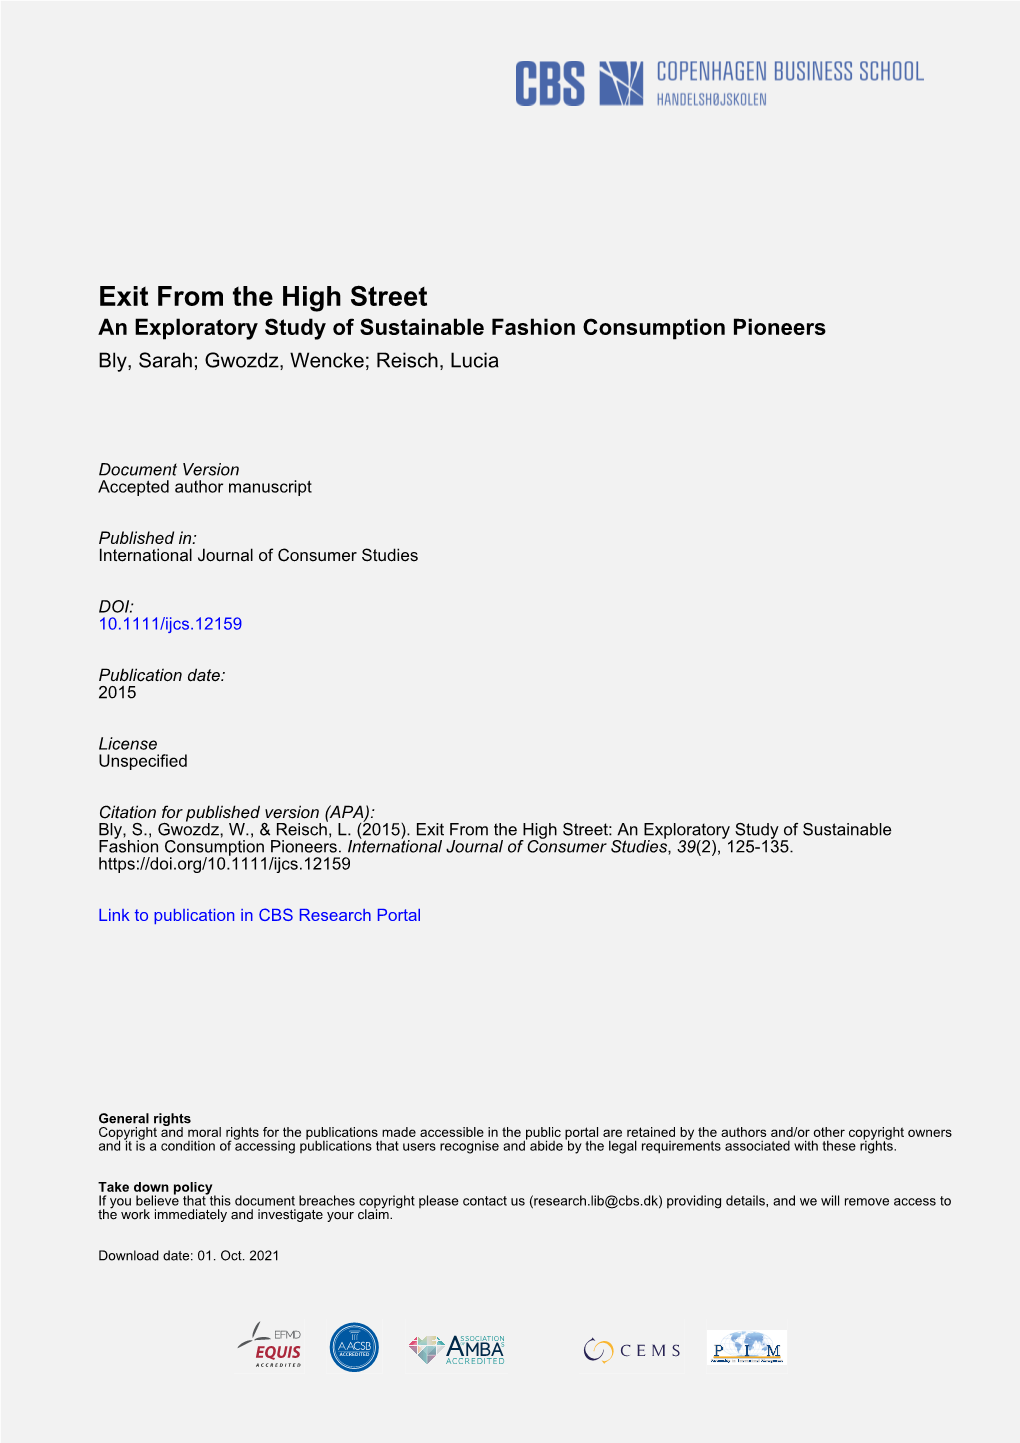 Exit from the High Street an Exploratory Study of Sustainable Fashion Consumption Pioneers Bly, Sarah; Gwozdz, Wencke; Reisch, Lucia